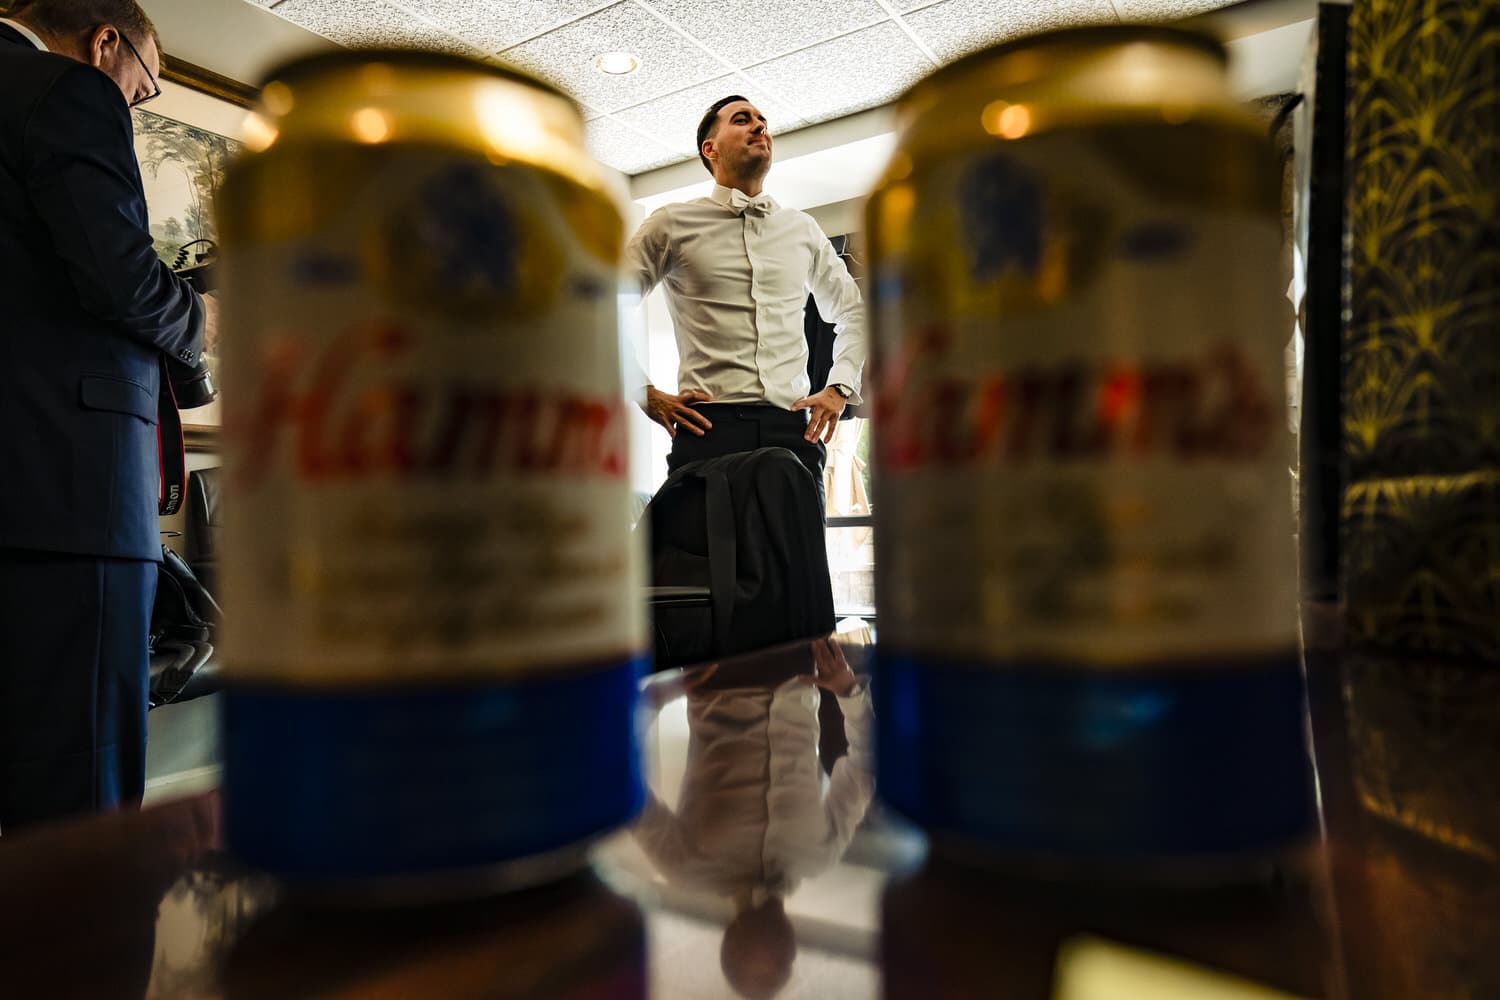 A colorful picture of a groom standing with his hands on his hips, two cans of Hamms visible on the table in front of him. 